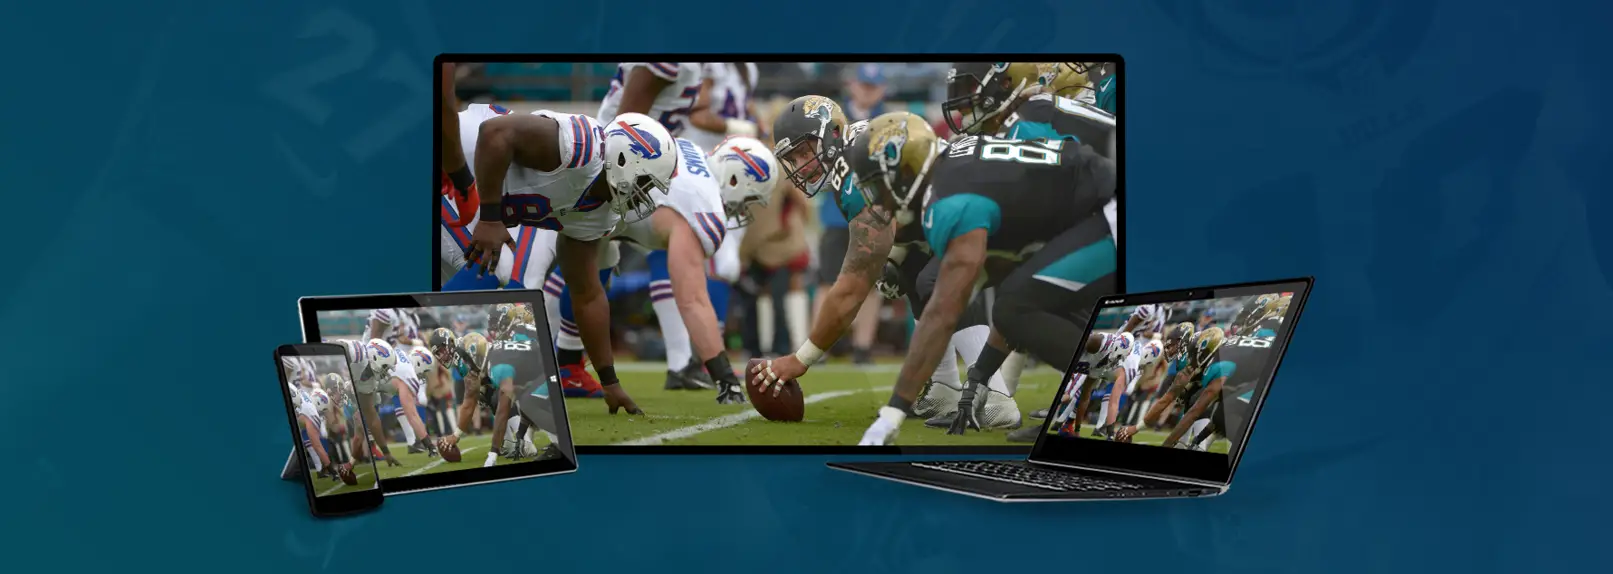 Heres how to stream next weeks Bills vs Jaguars NFL Game on your Android phone or tablet